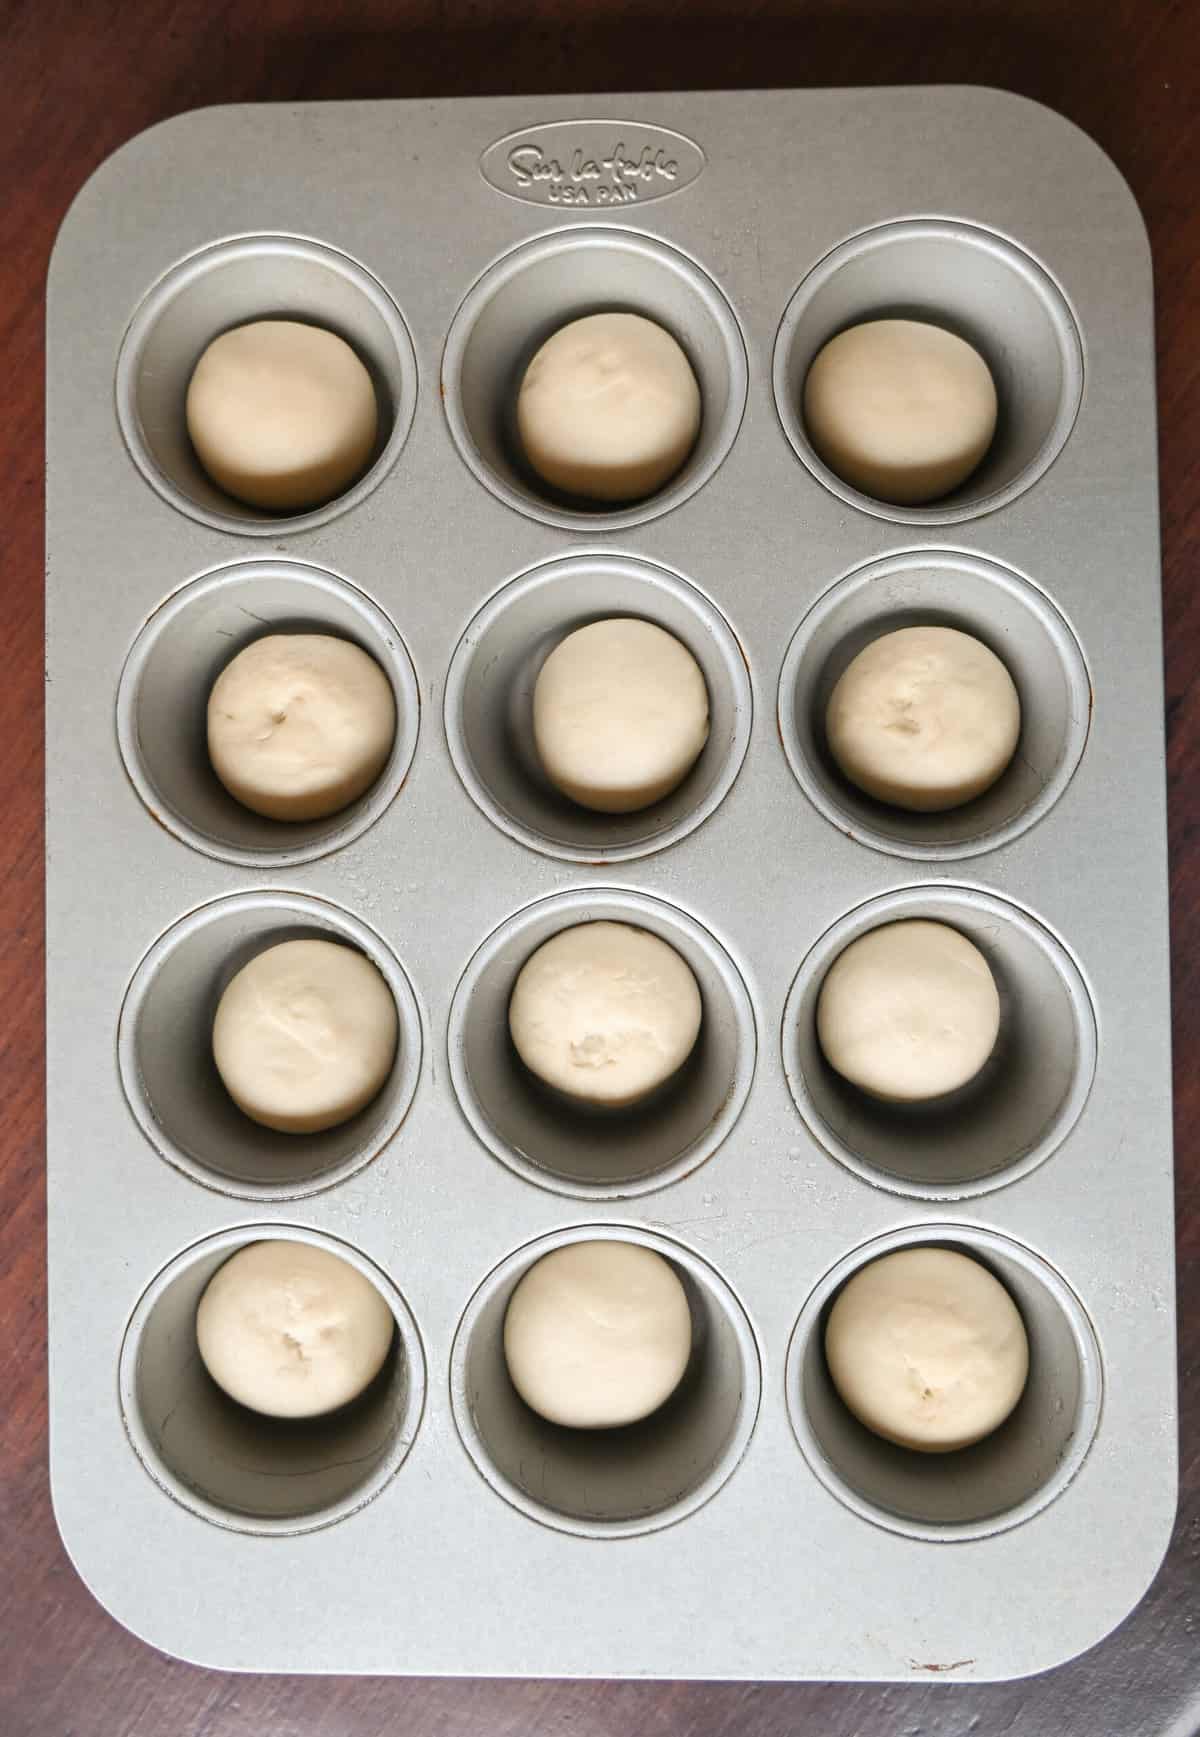 Everything Bagel Cream Cheese Bites. These viral Cream Cheese Filled Everything Bagel Bites are so easy to make and everyone loves them! These Stuffed Bagel Minis are an everything bagel and cream cheese all in one bite.